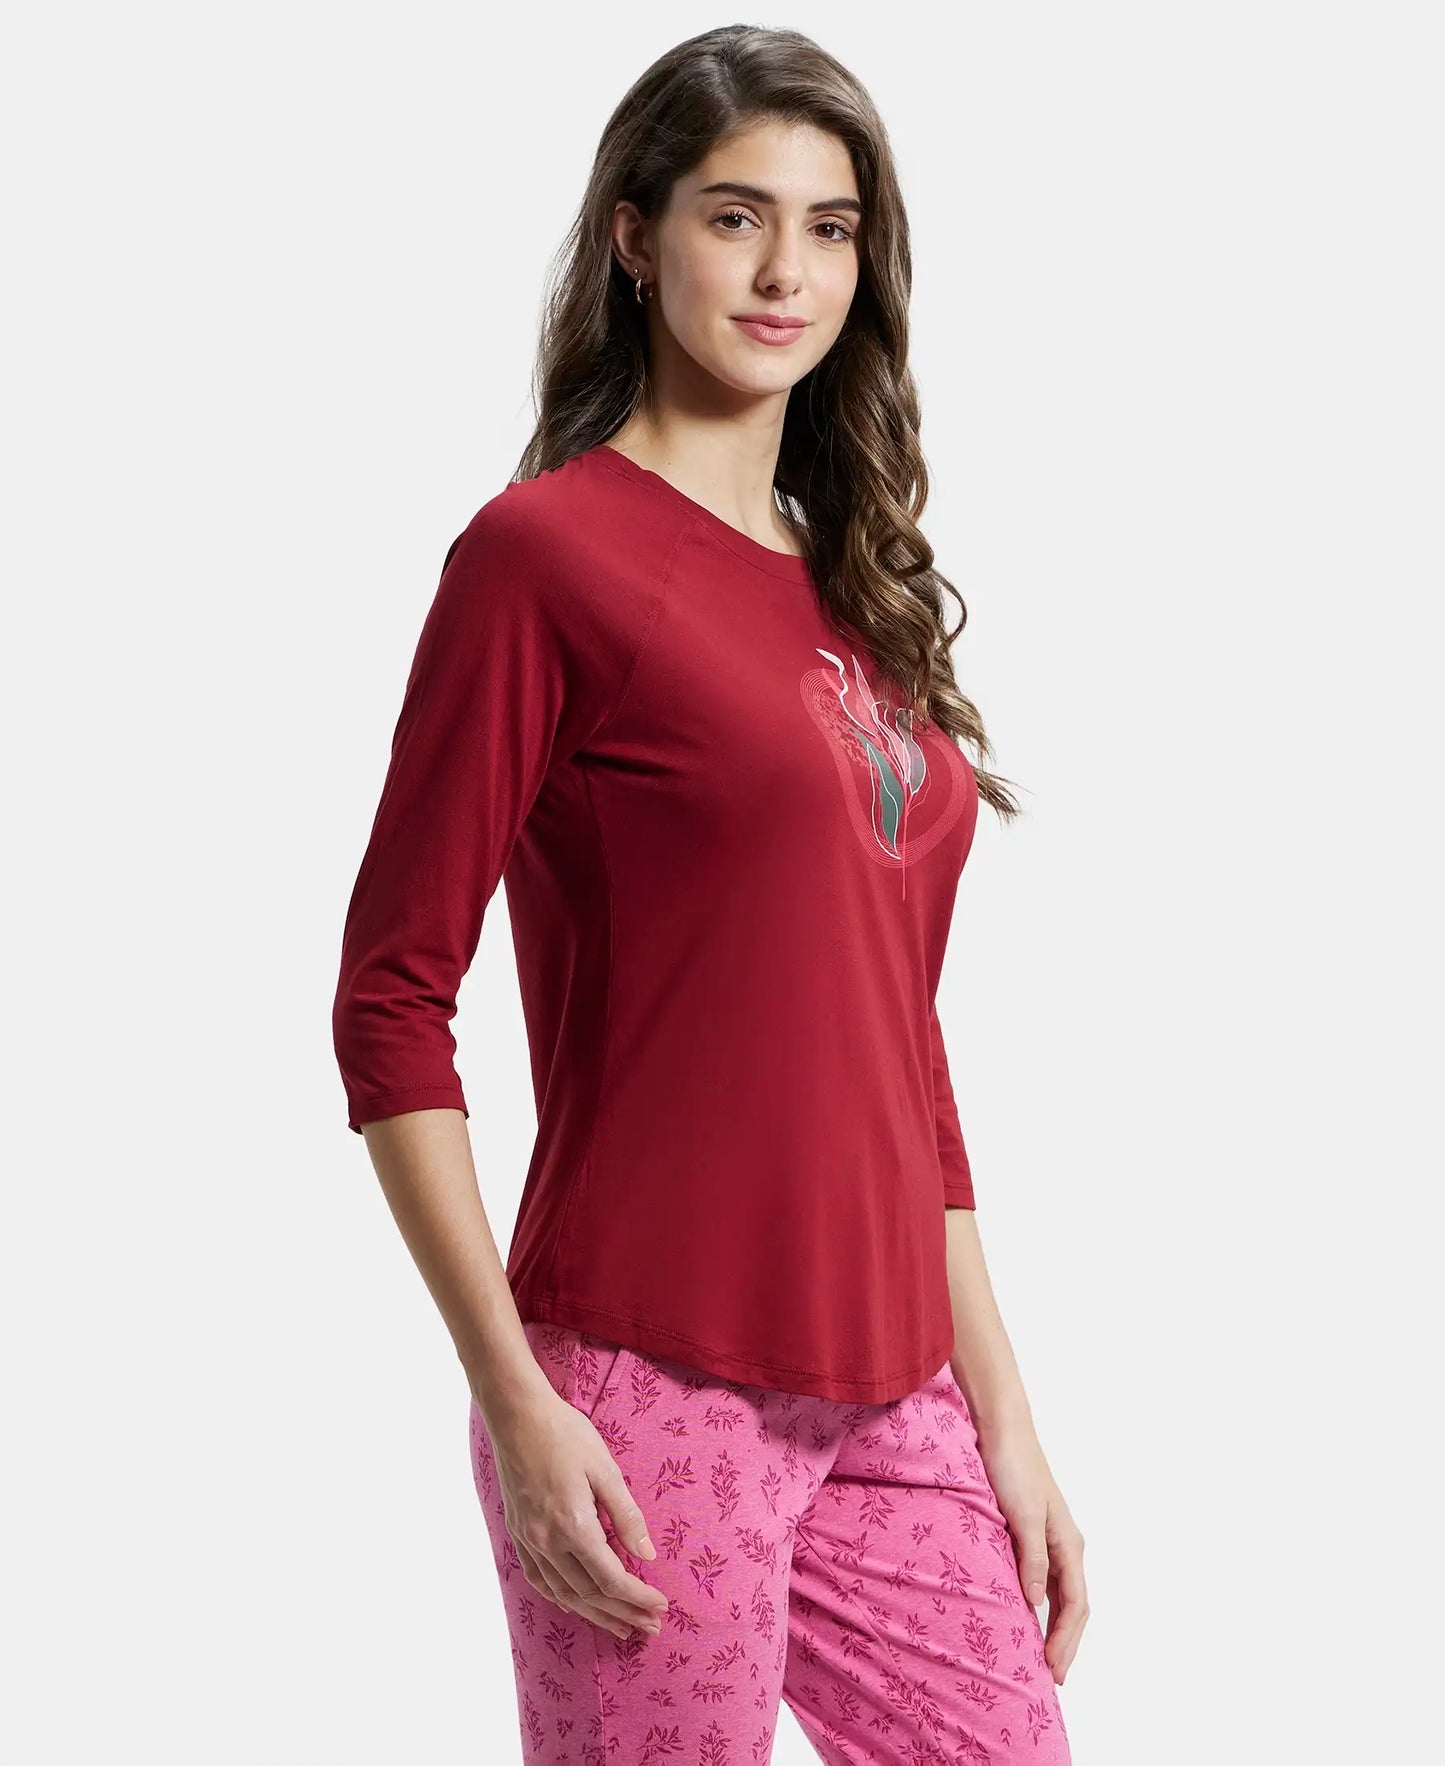 Micro Modal Cotton Relaxed Fit Graphic Printed Round Neck Three Quarter Sleeve T-Shirt - Rhubarb-2